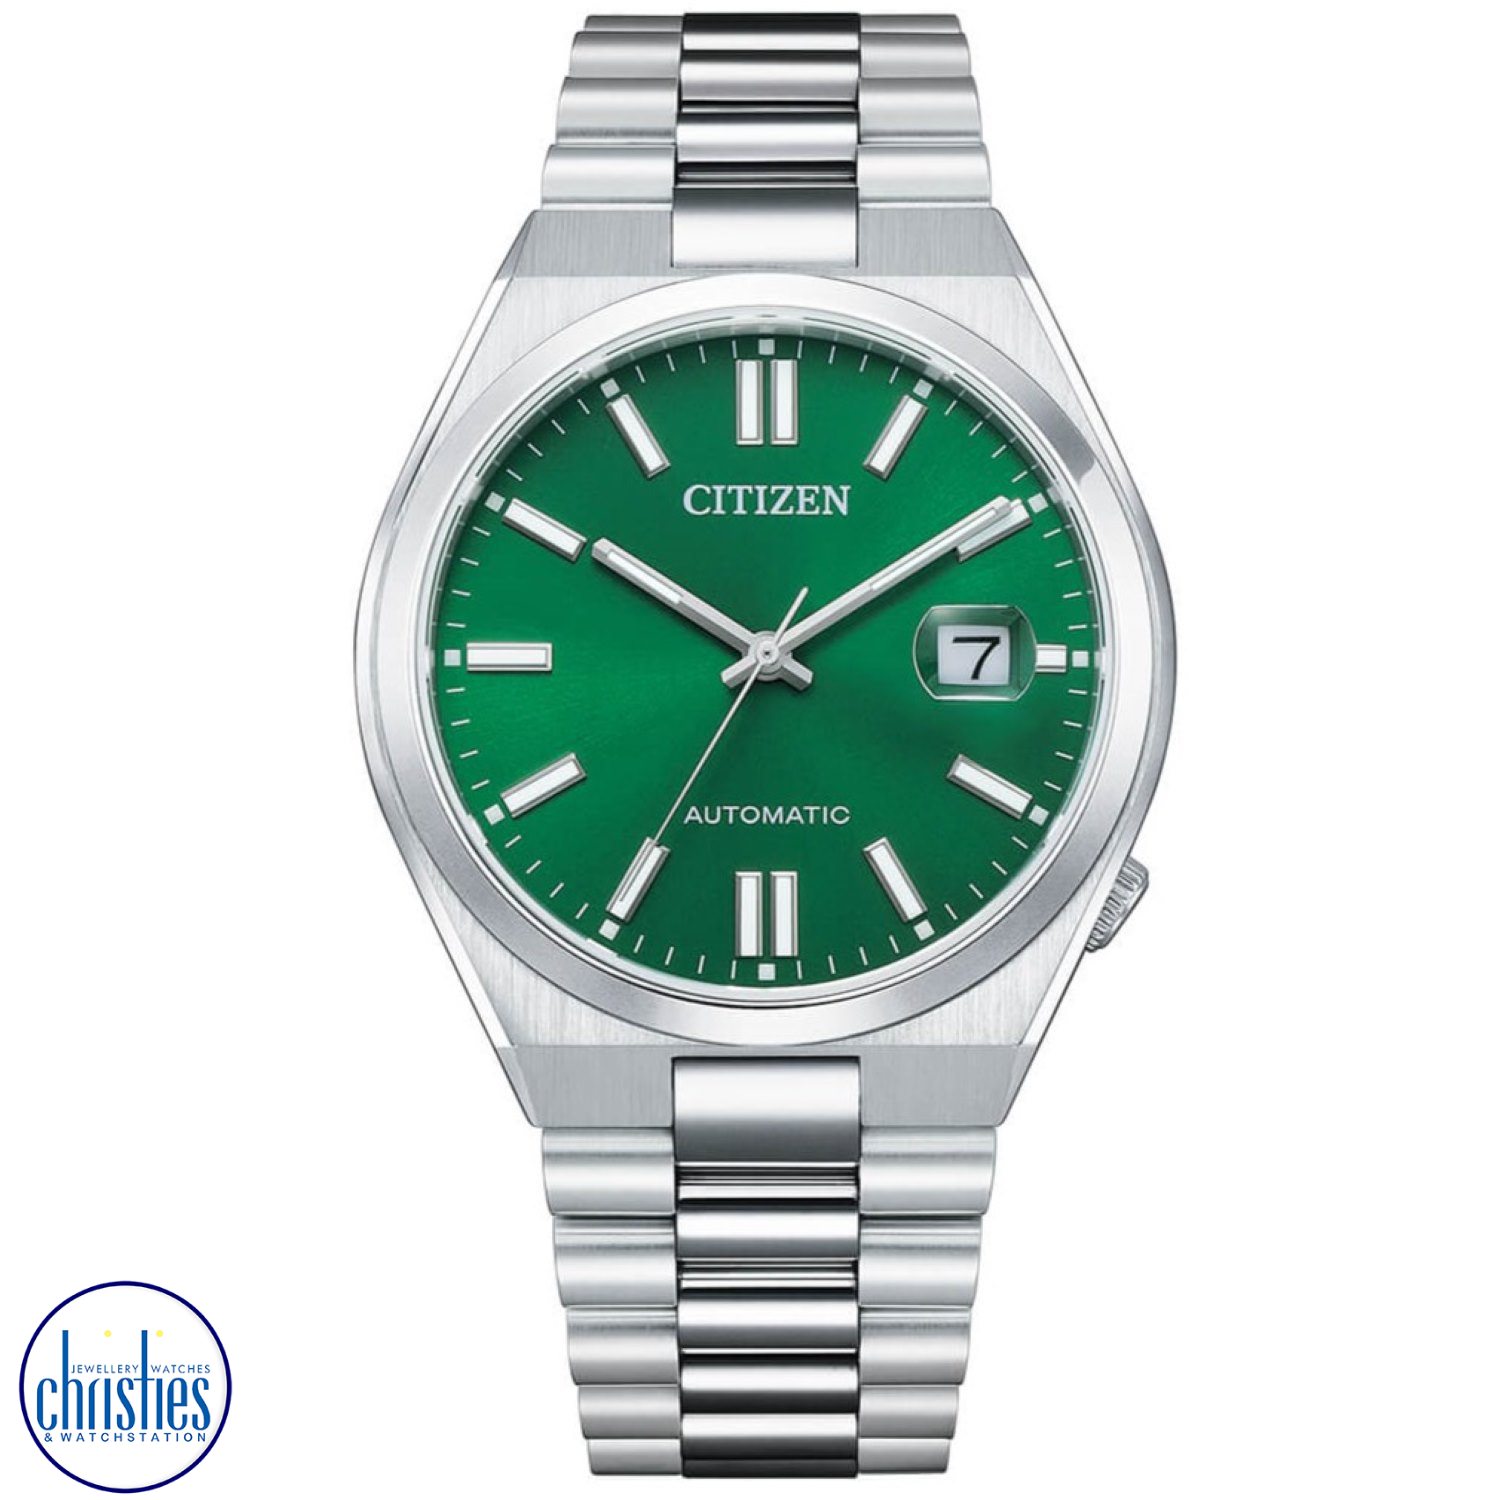 NJ0150-81X CITIZEN Automatic Green- Dial Watch NJ0151-88X Watches Auckland